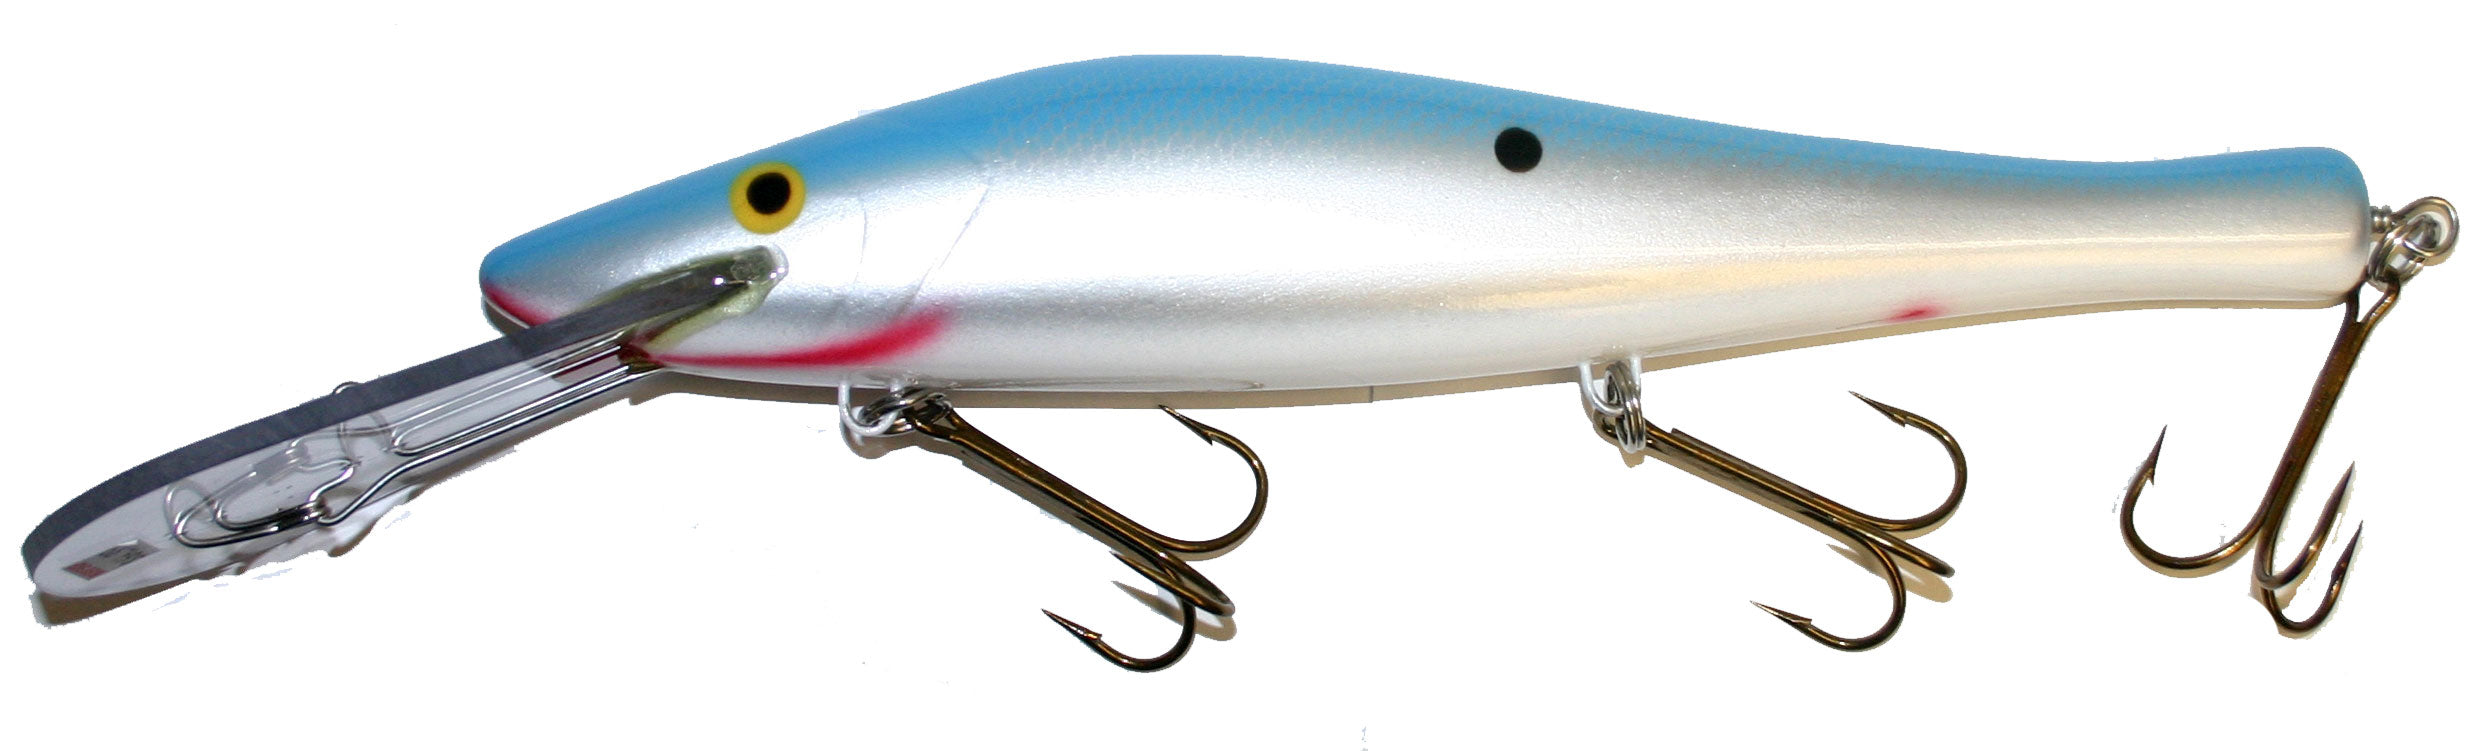 Legend Lures! All 4 models are in stock for a limited time! These